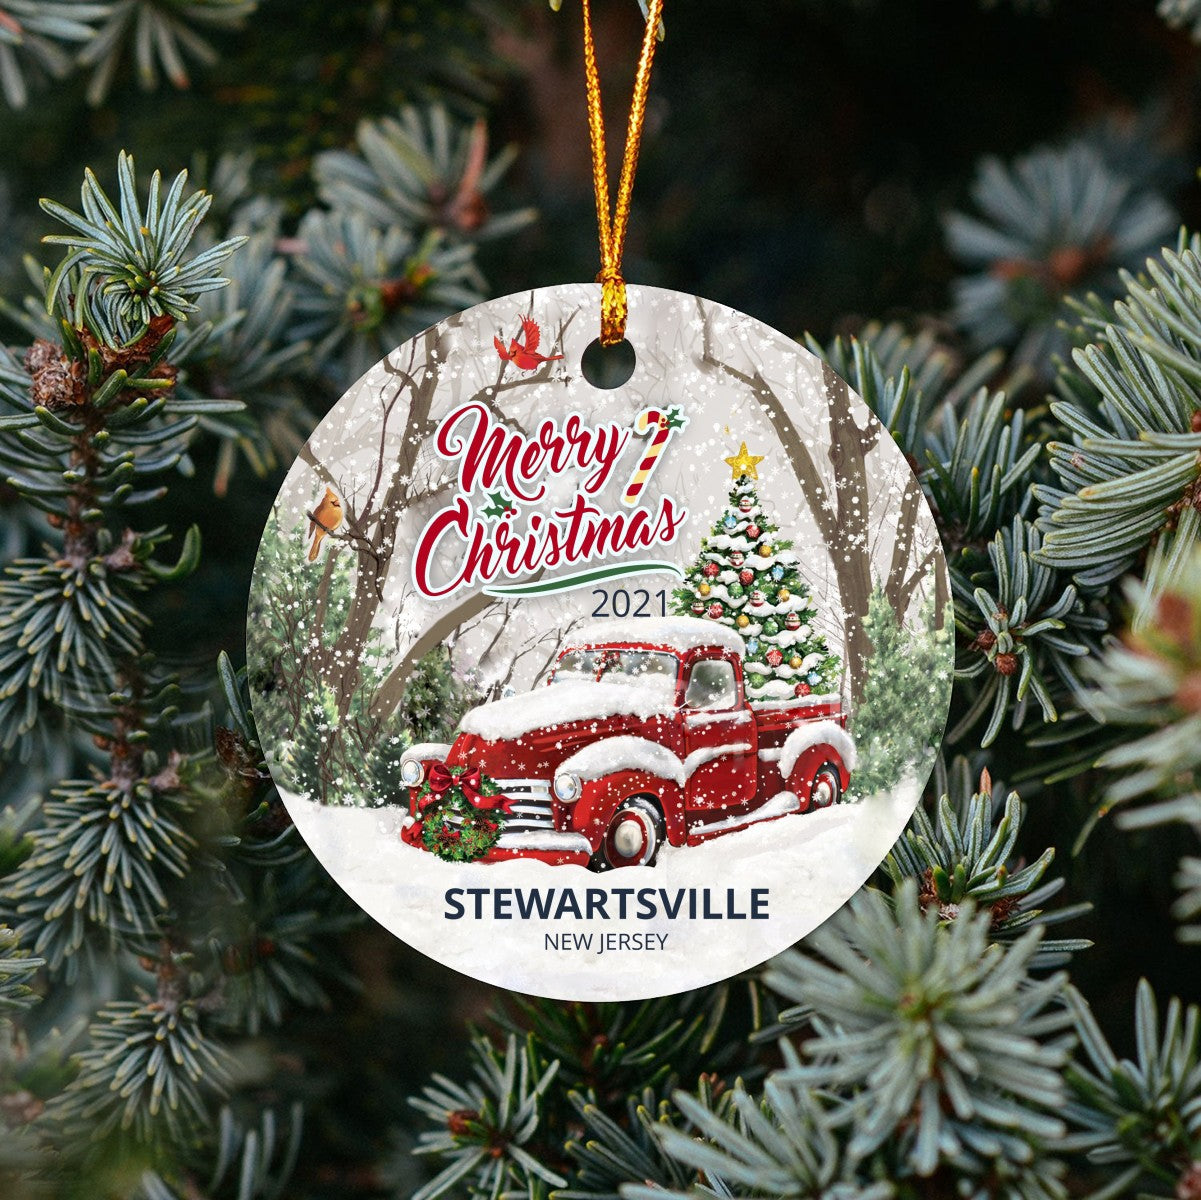 Christmas Tree Ornaments Stewartsville - Ornament With Name City, State Stewartsville New Jersey NJ Ornament - Red Truck Xmas Ornaments 3'' Plastic Gift For Family, Friend And Housewarming